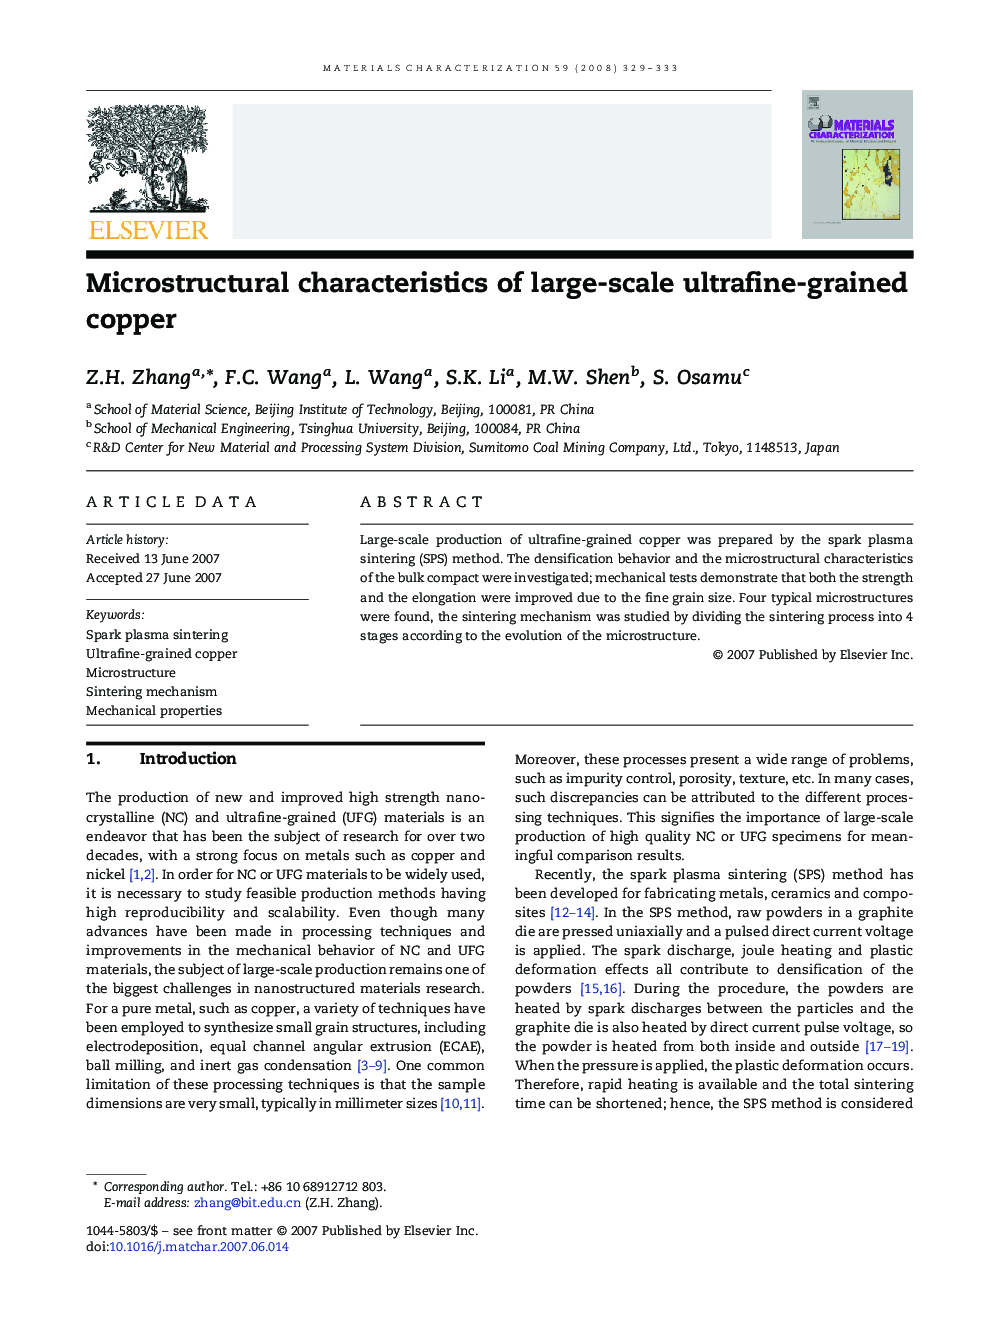 Microstructural characteristics of large-scale ultrafine-grained copper